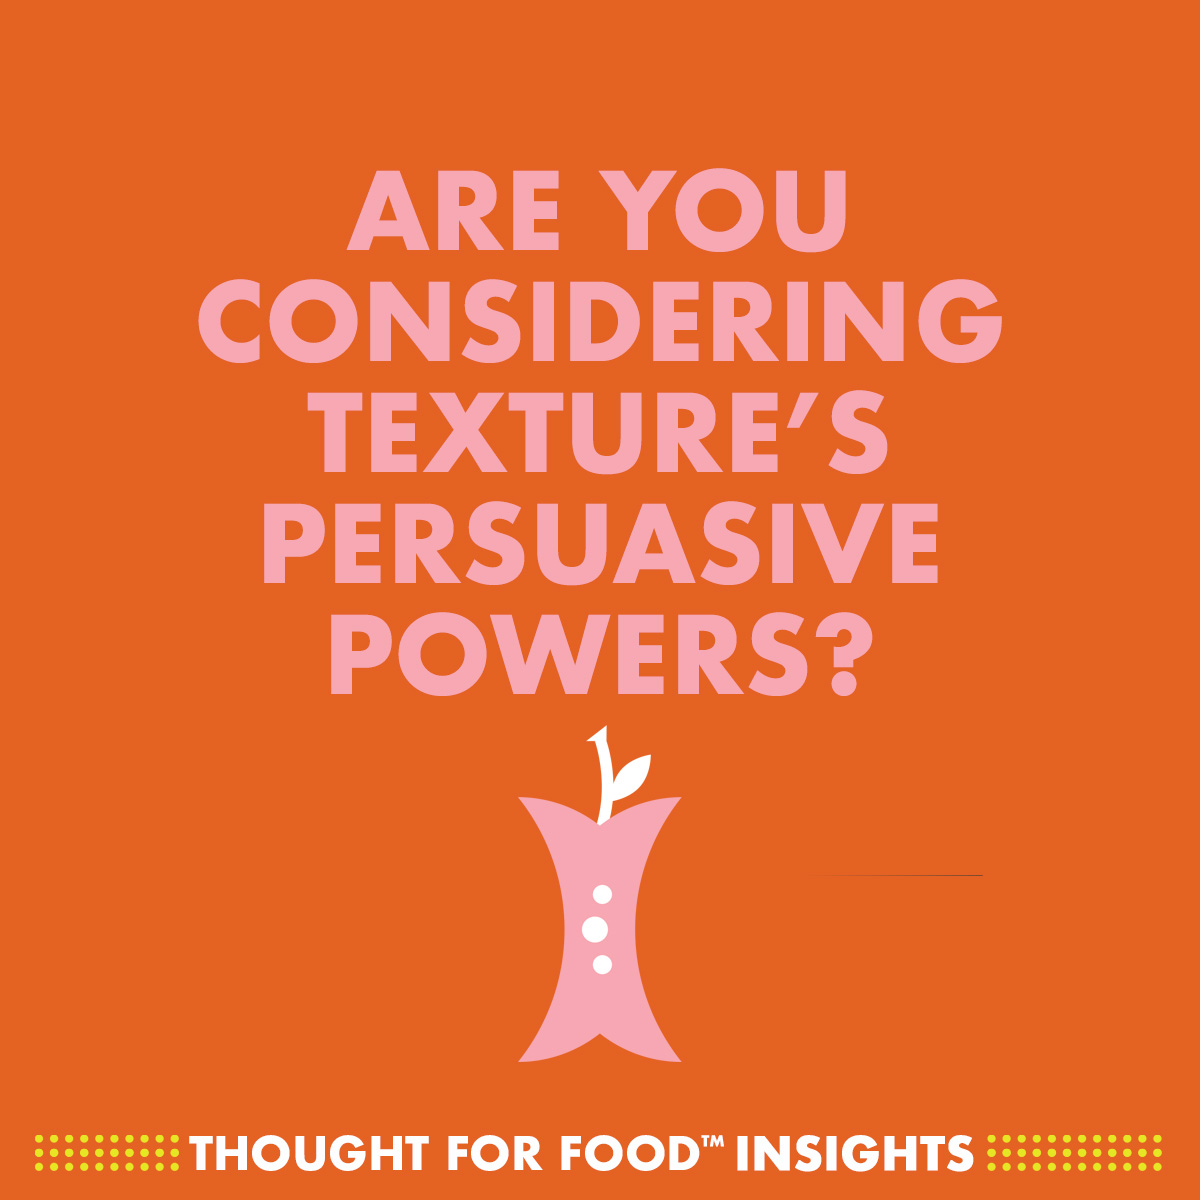 are you considering texture's persuasive powers?